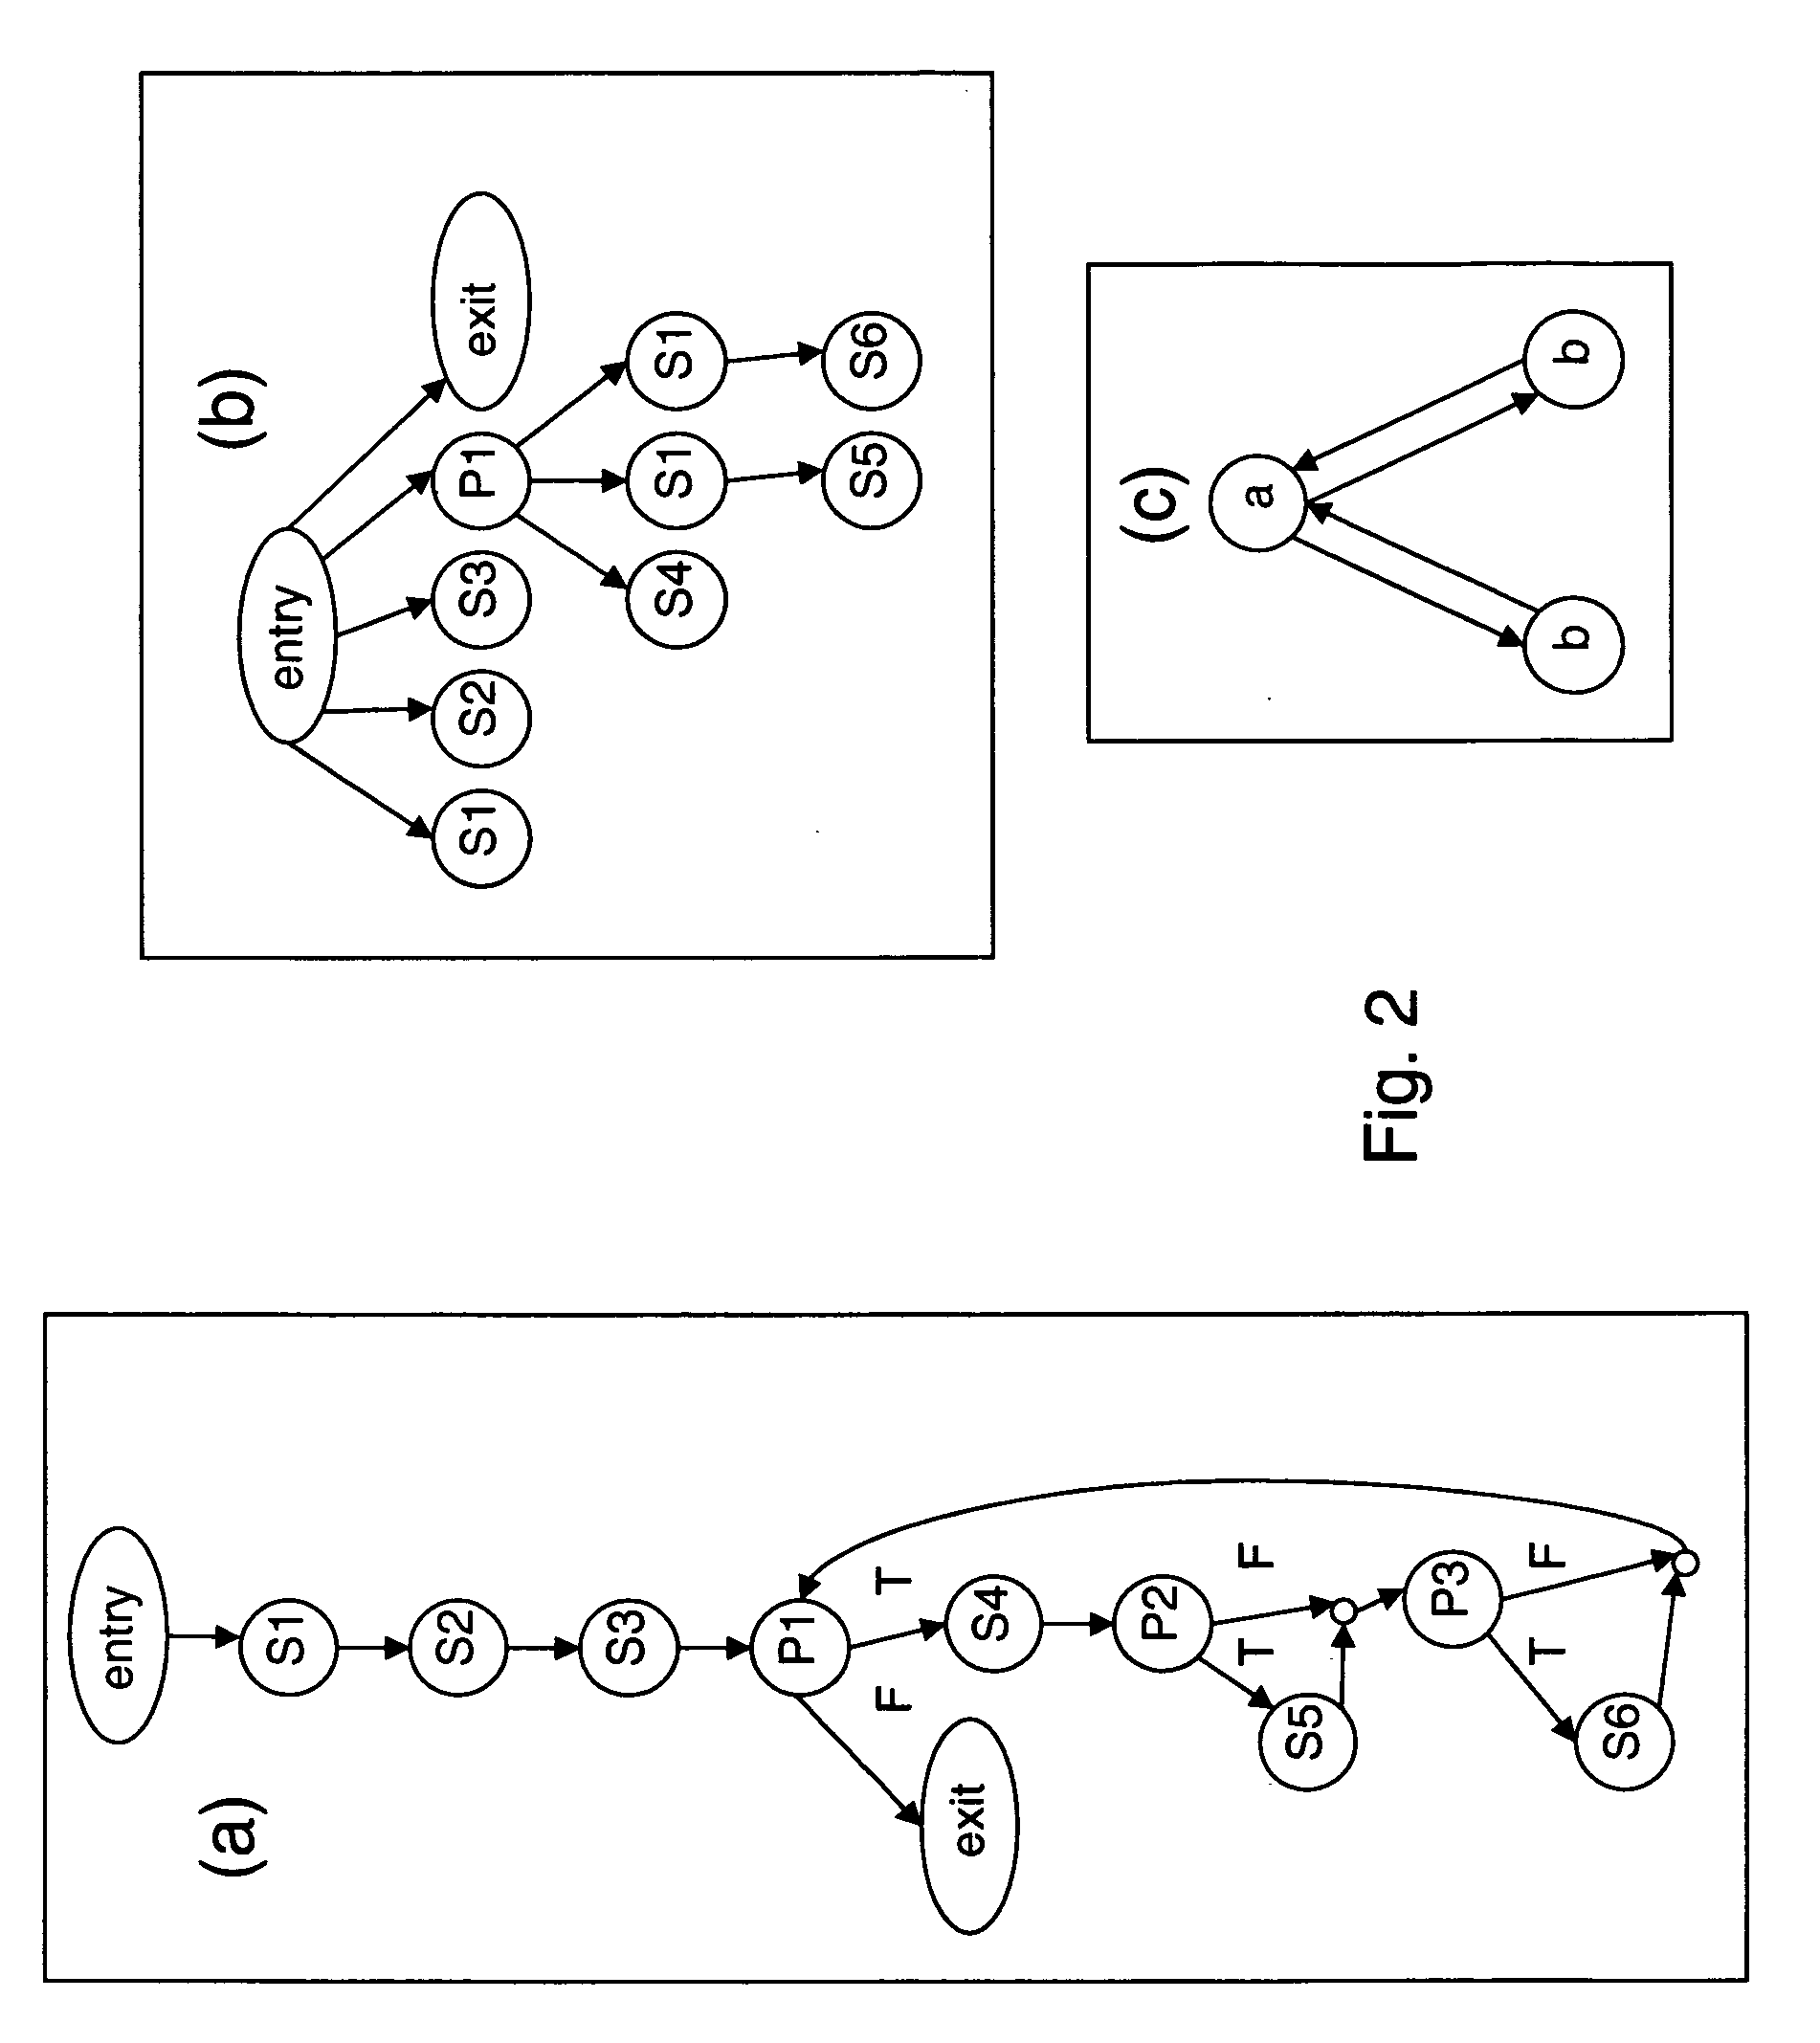 Method for optimizing integrated circuit device design and service